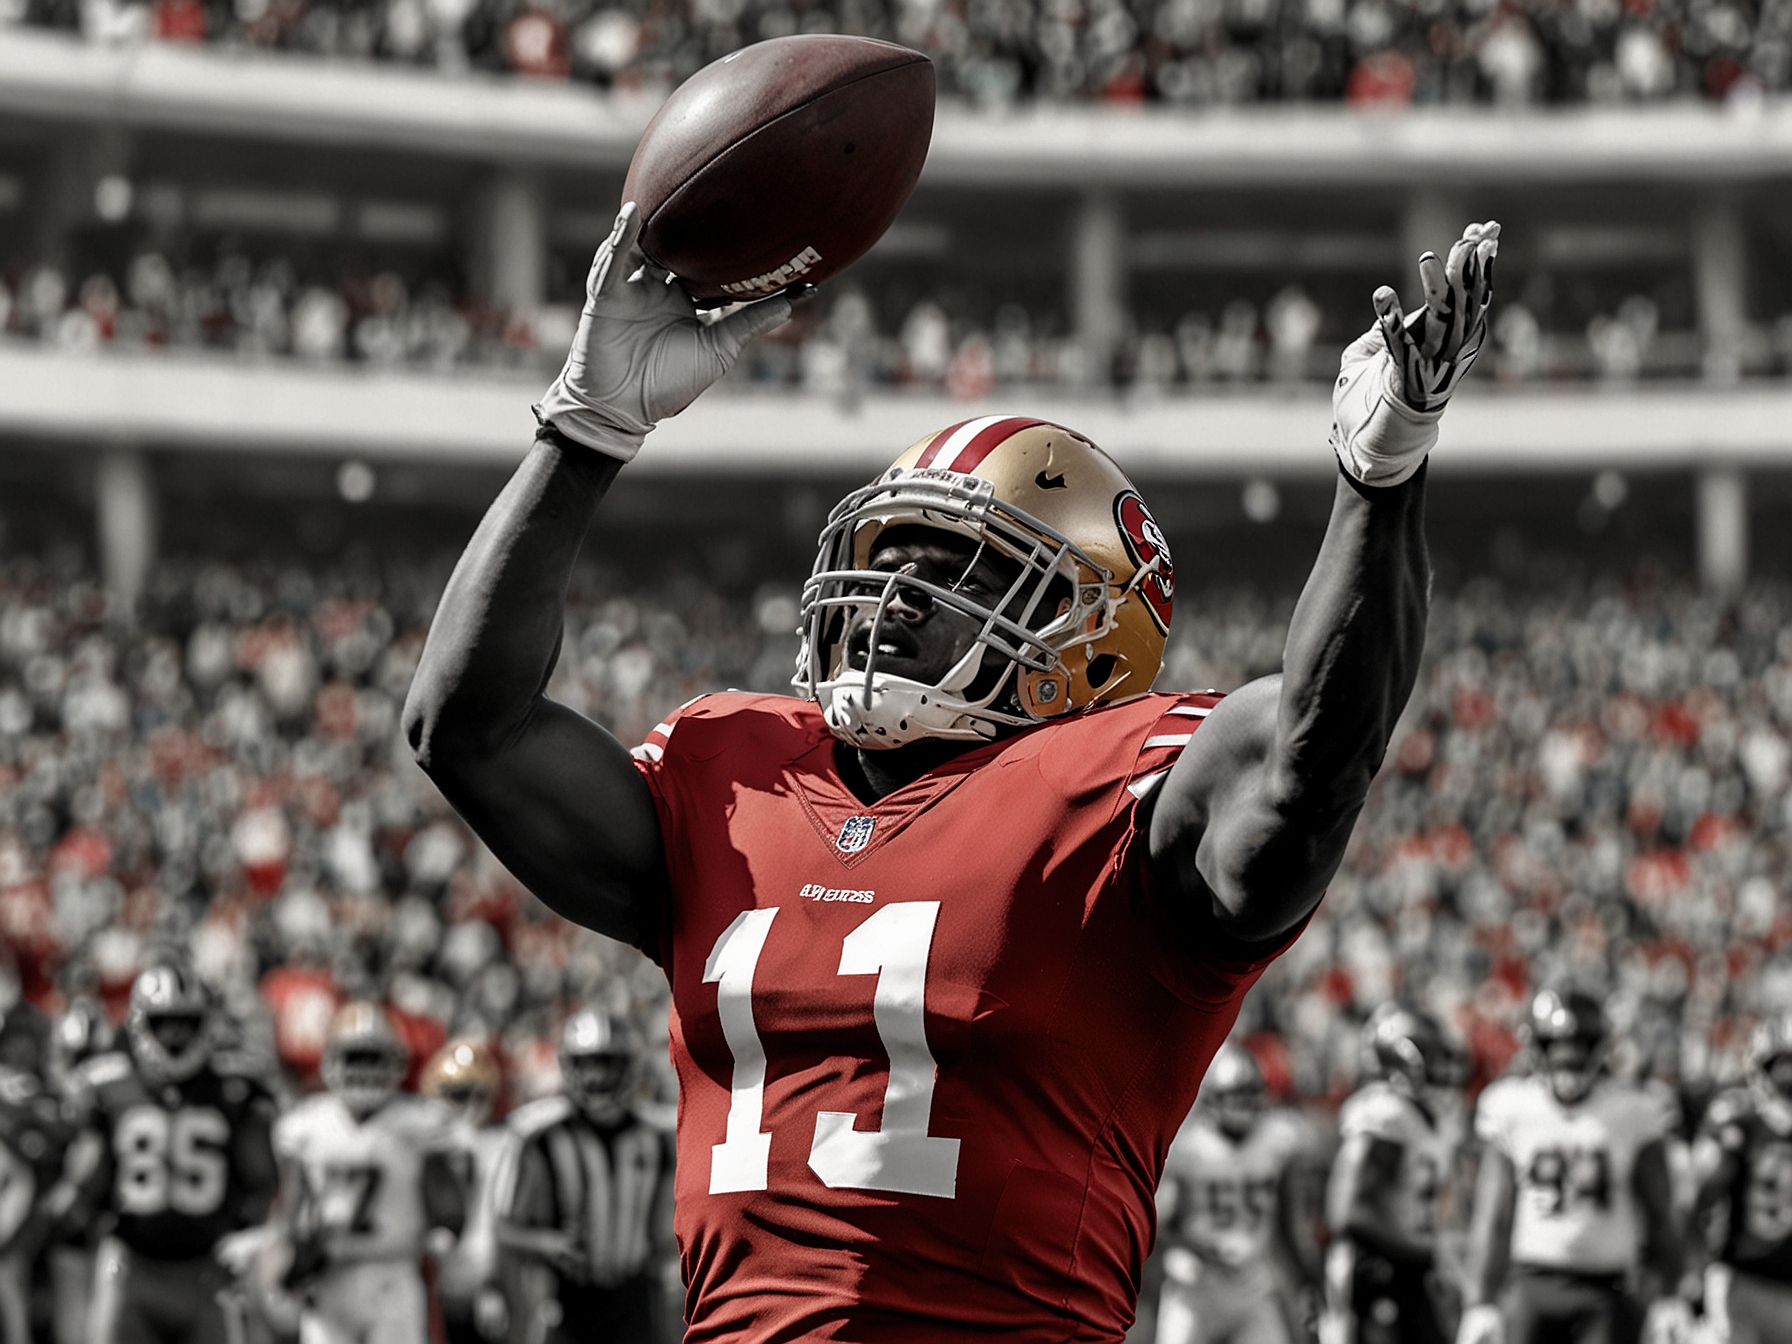 Brandon Aiyuk in action, making a spectacular catch during a San Francisco 49ers game, symbolizing his crucial role and athletic contributions to the team.